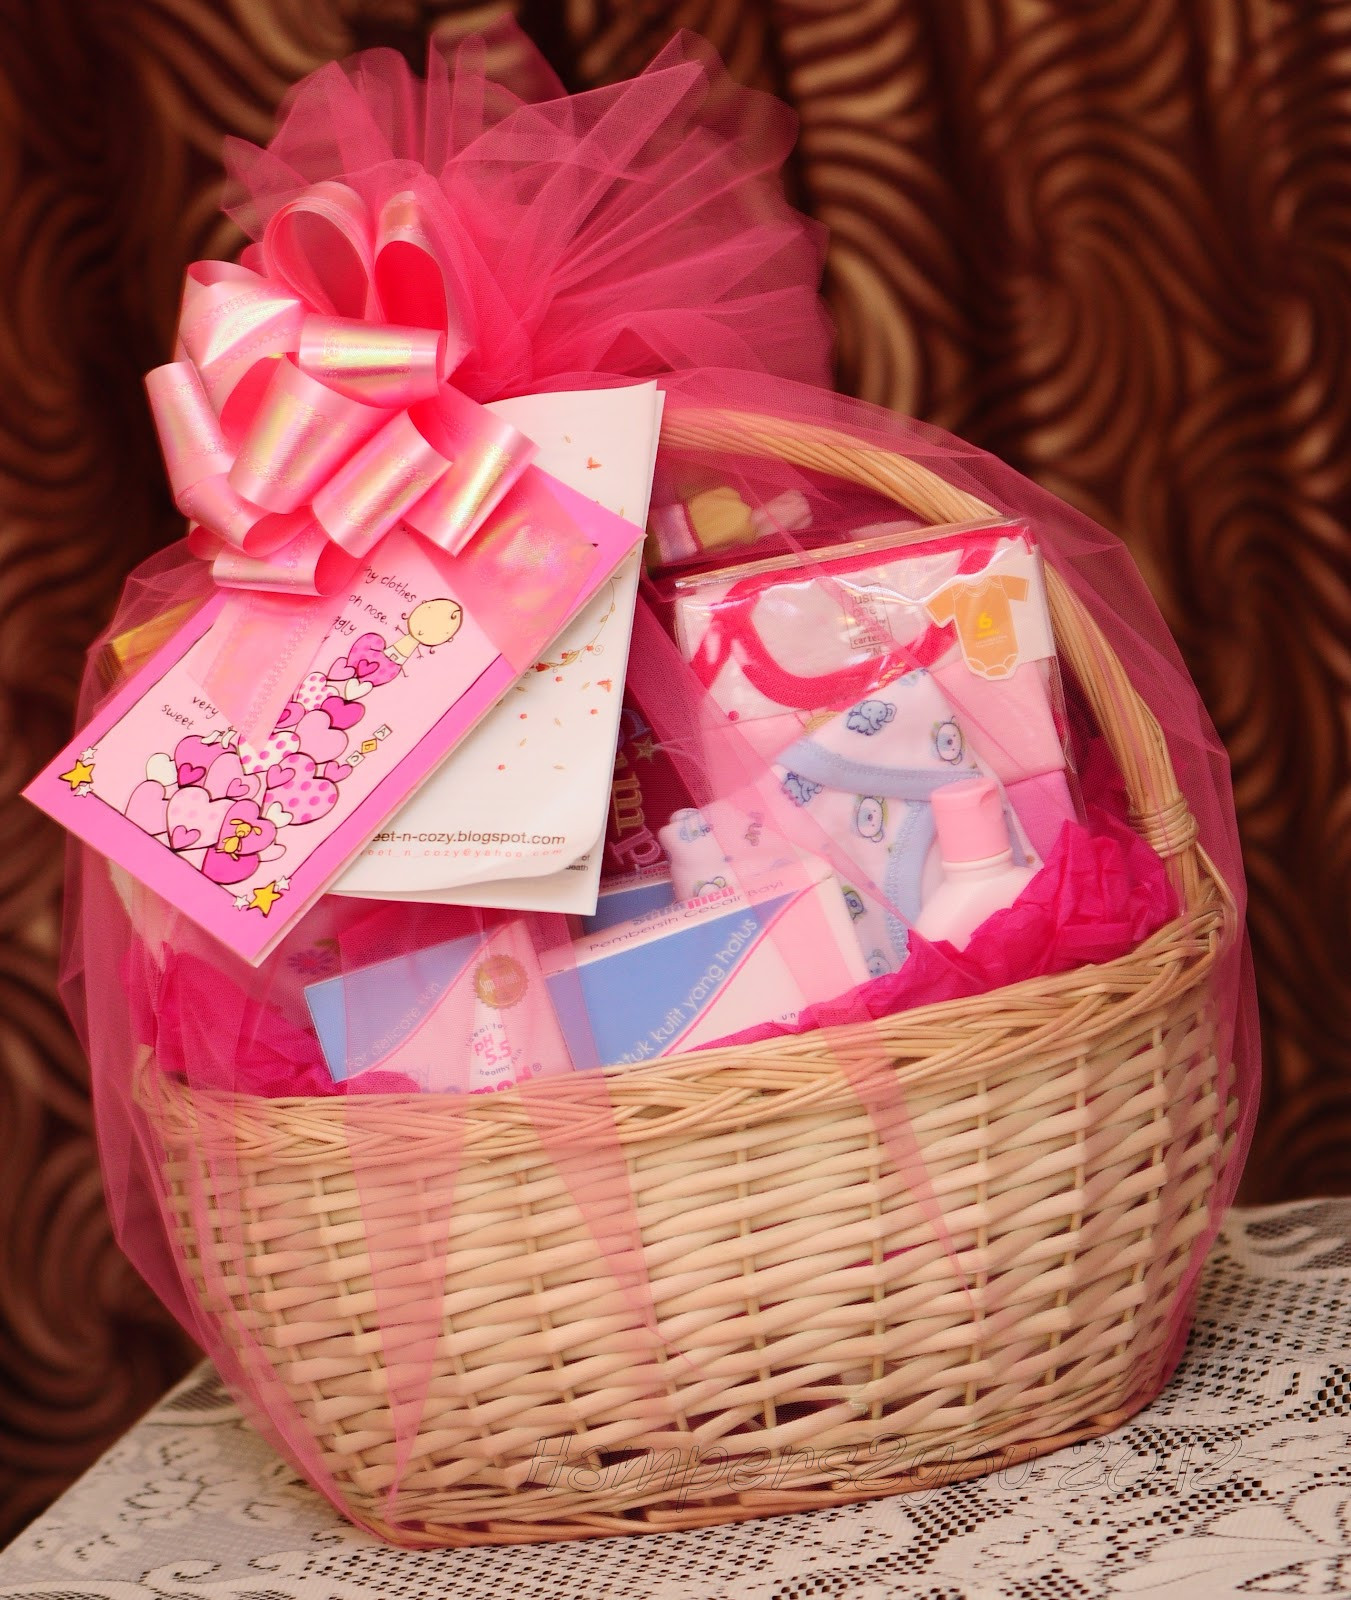 Ideas For New Baby Gift
 Hampers2you Baby Gift Baskets for Newborn Girl